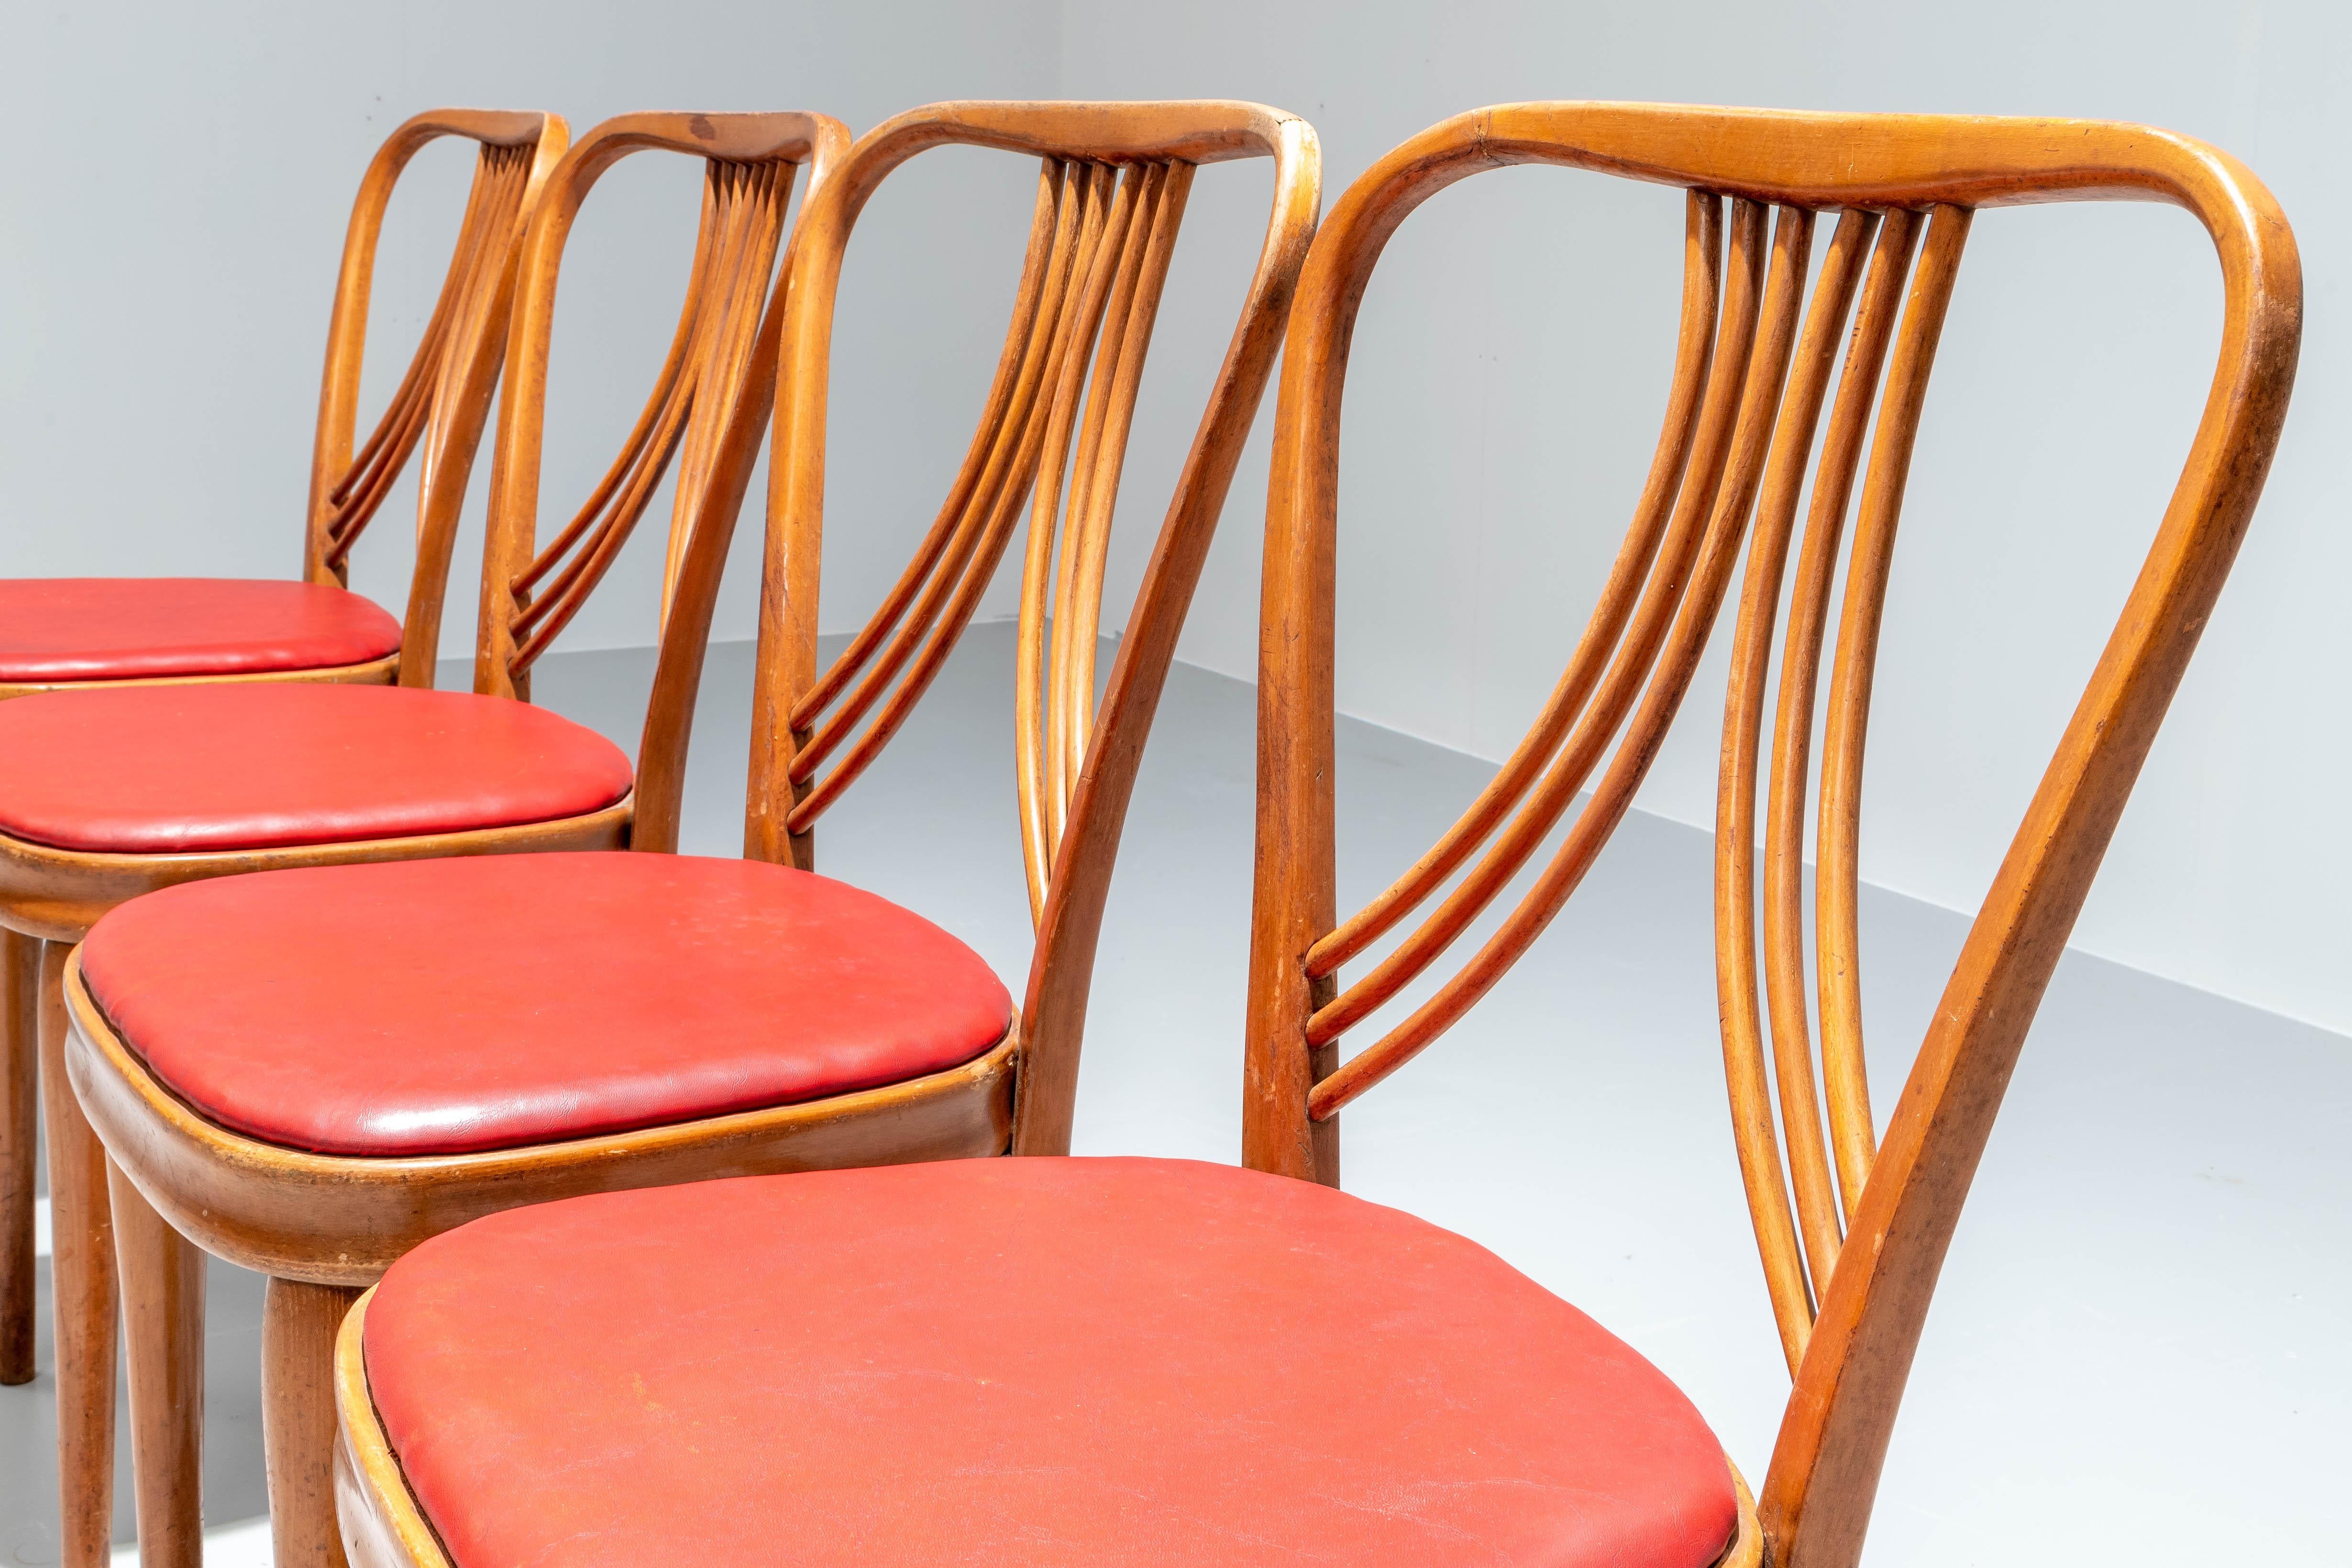 Set of 4 Diningroom Chairs in Blond Wood and Red Faux Leather, Italy, 1950's In Good Condition For Sale In Amsterdam, NL